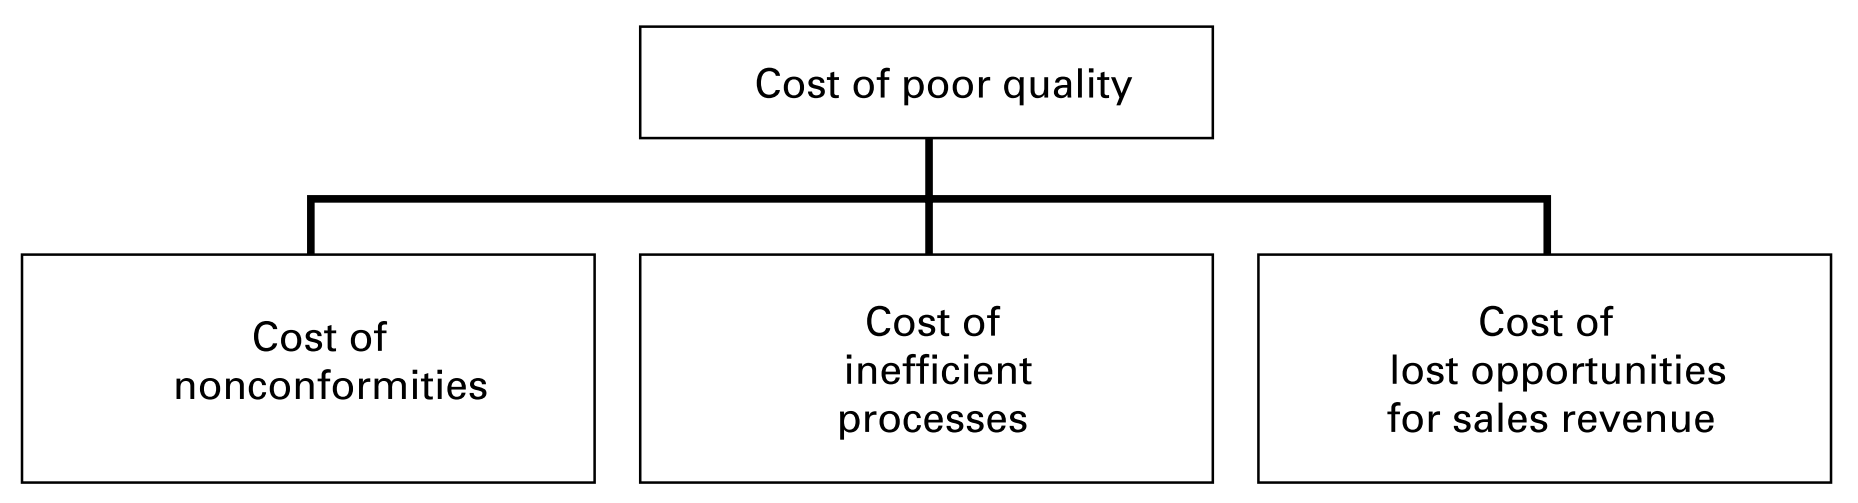 Cost of poor quality